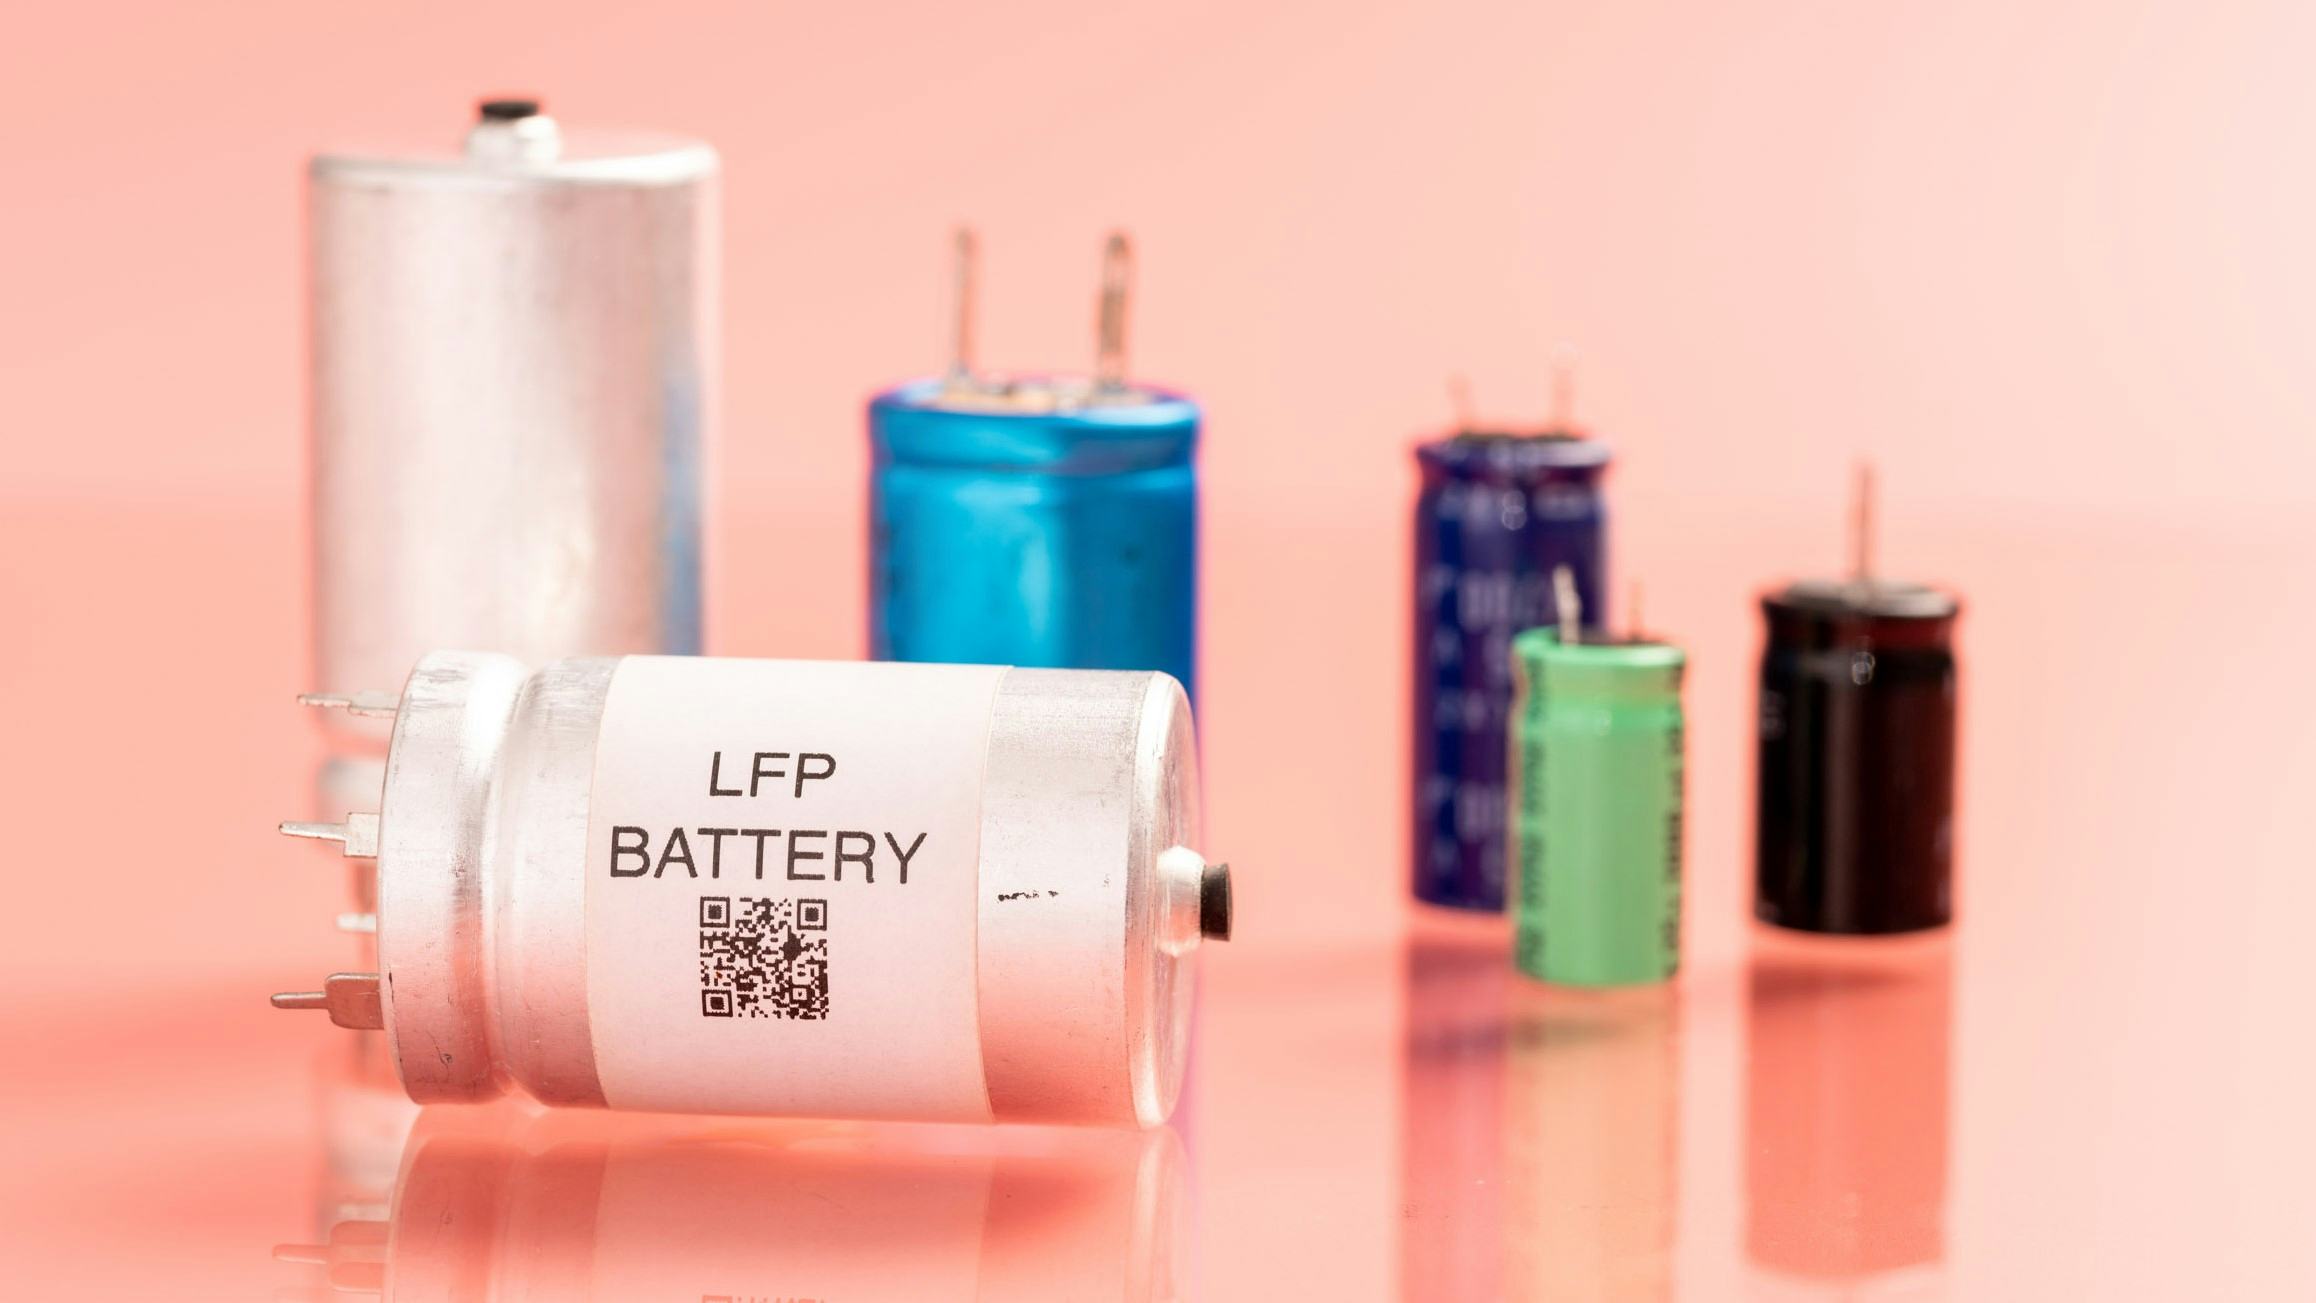 With LFP battery packs weighing only 11% more than NMC packs, there are no valid reasons left to justify banning their use for e-bikes. - Photo Shutterstock